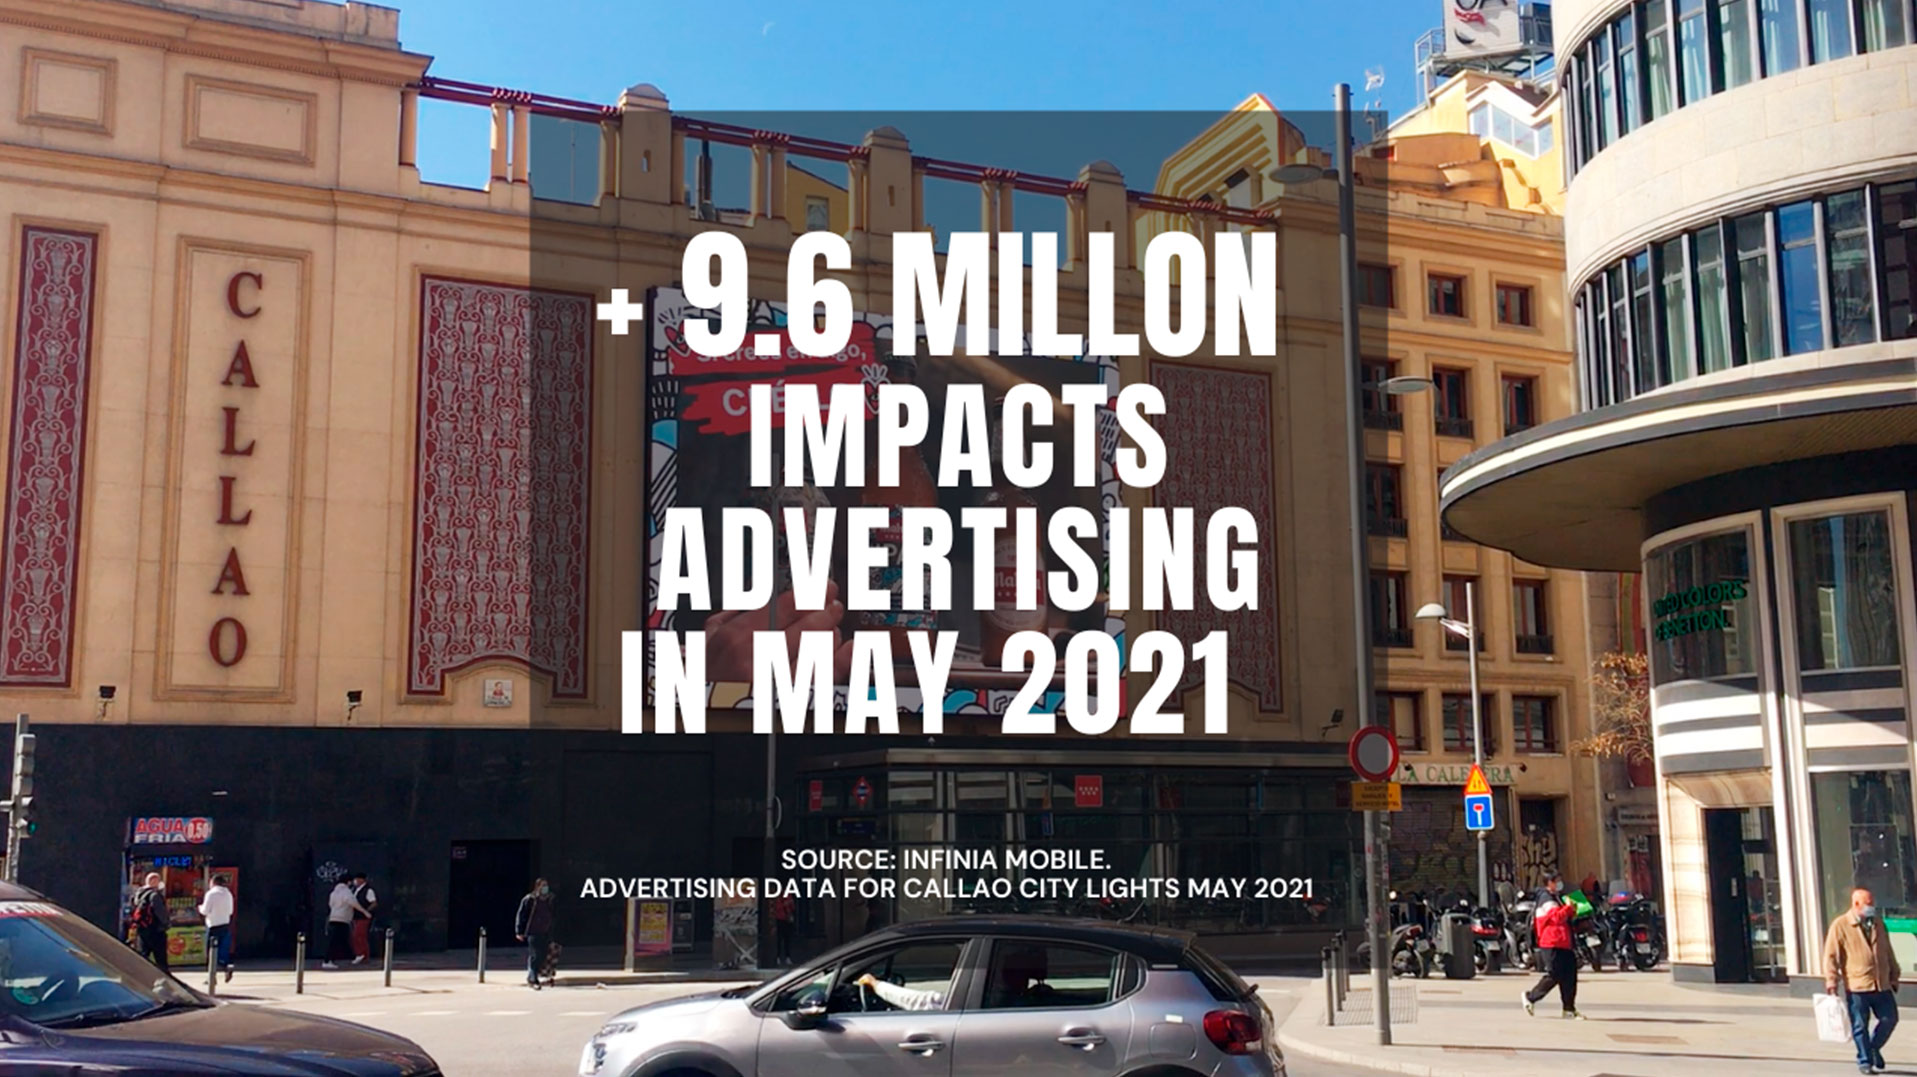 NEARLY 9.6 MILLION OF DOOH IMPACTS IN MAY